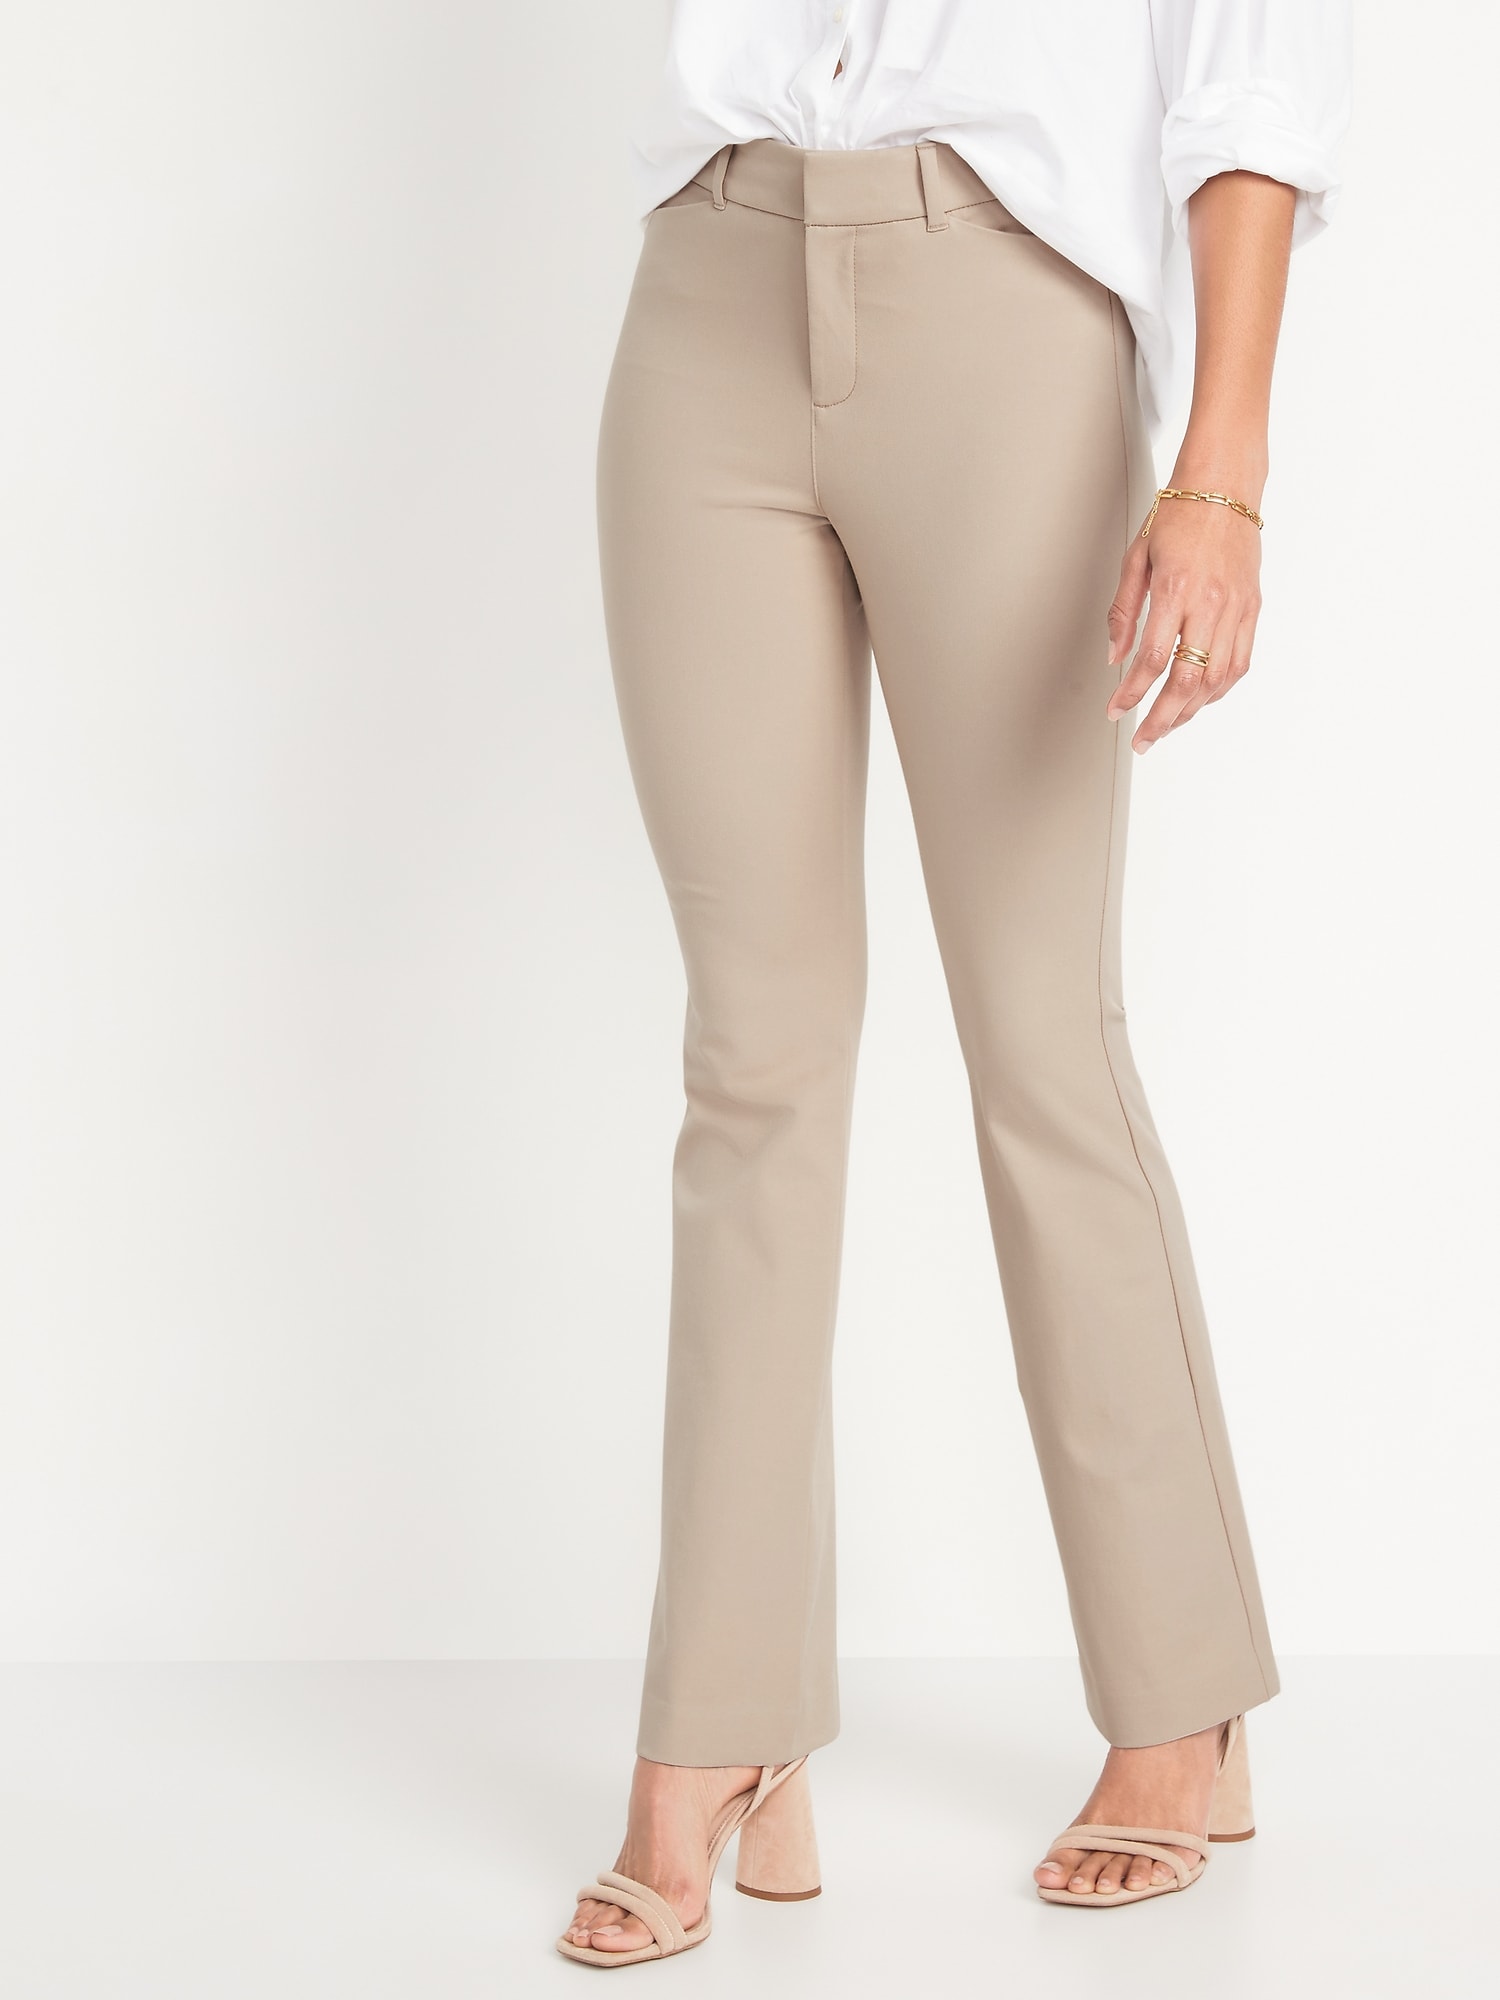 High Waisted Pixie Full Length Flare Pants For Women Old Navy